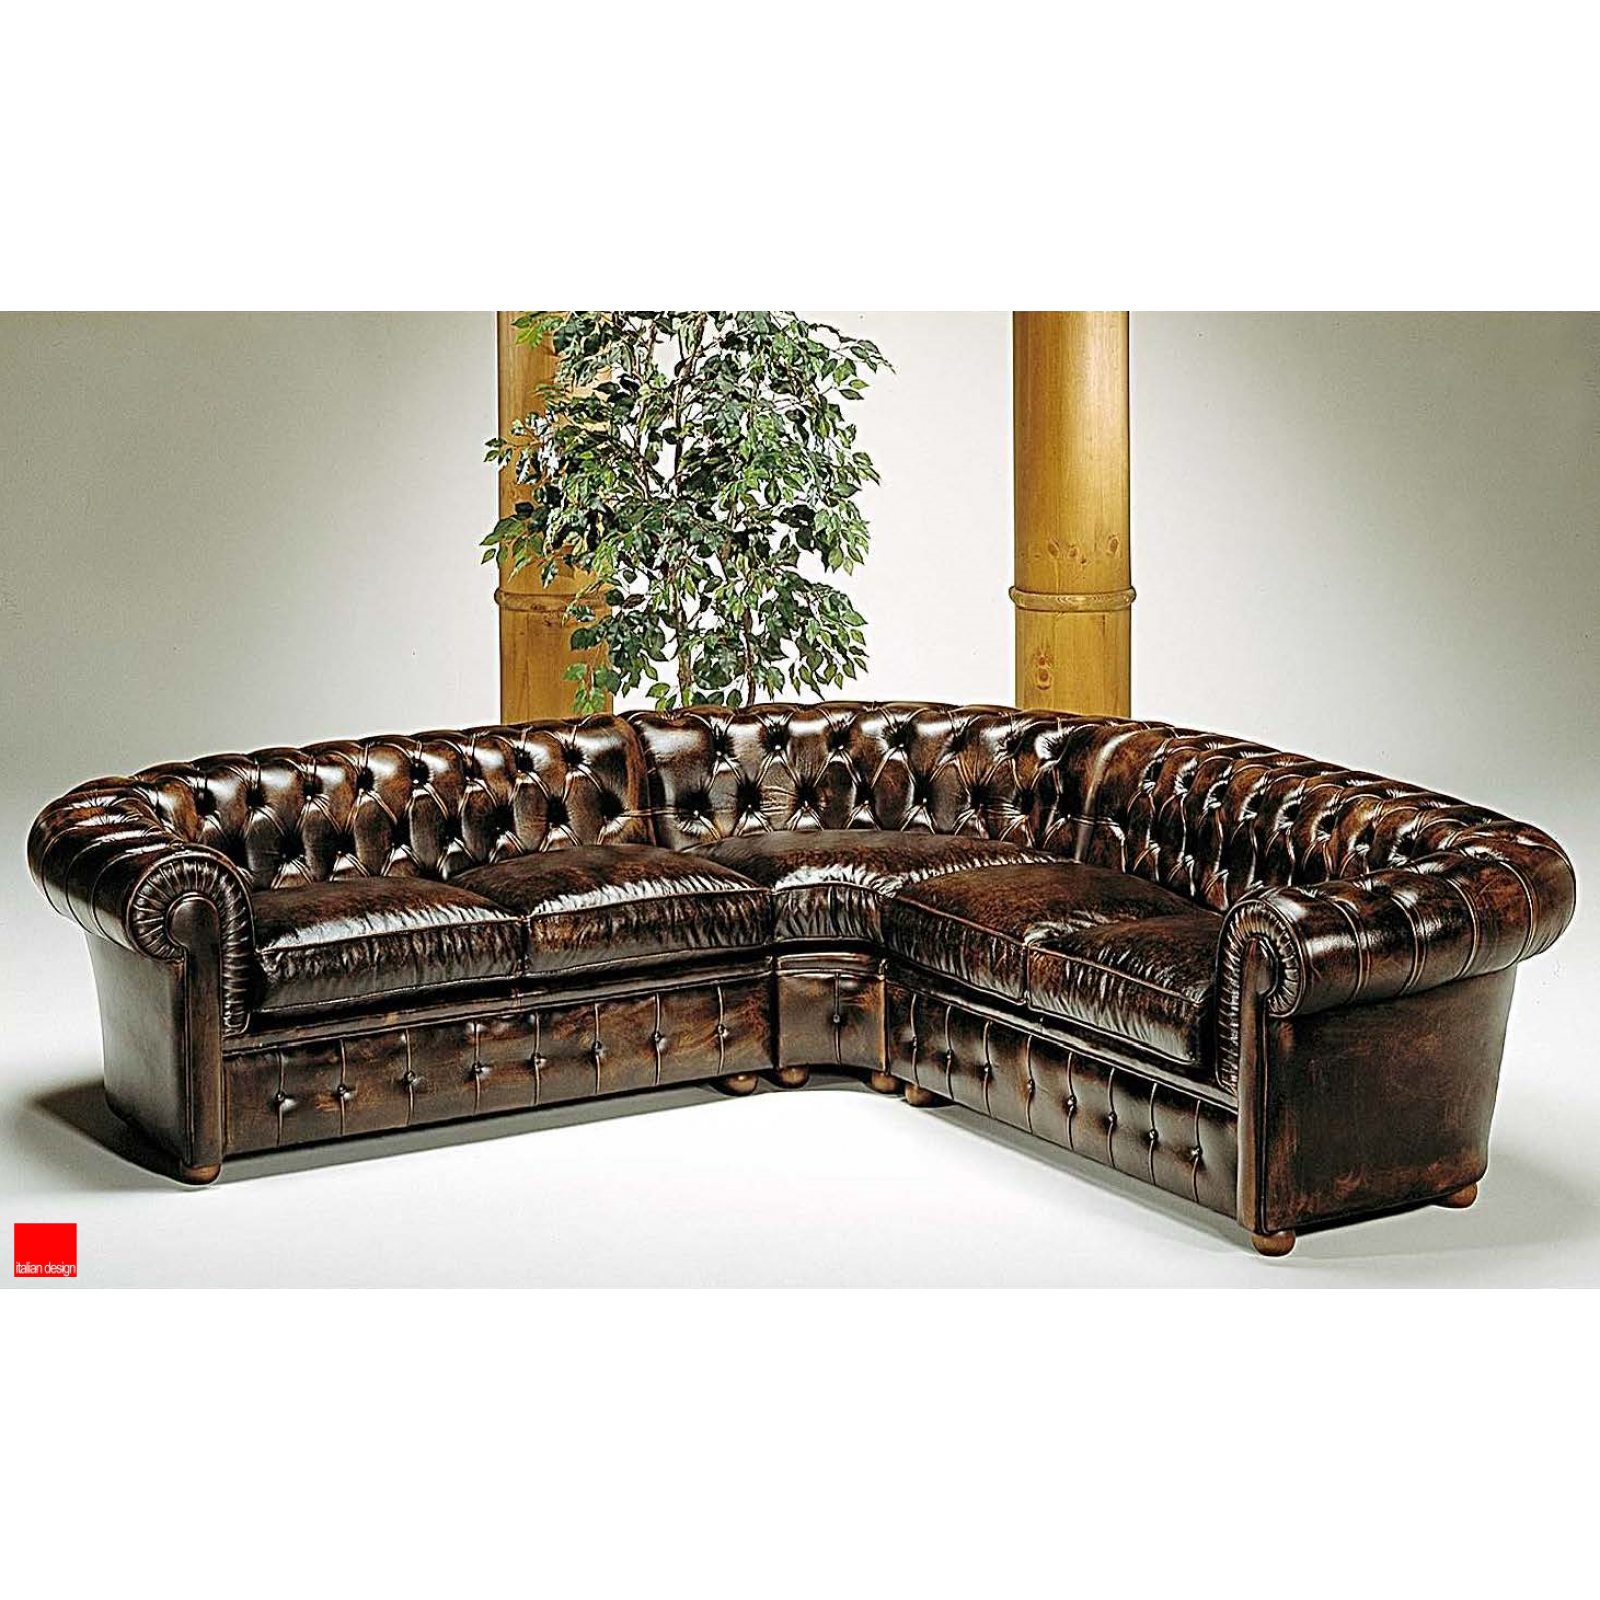 Corner Sofa Chester 08 - with Leather Covering - Italian Design Contract